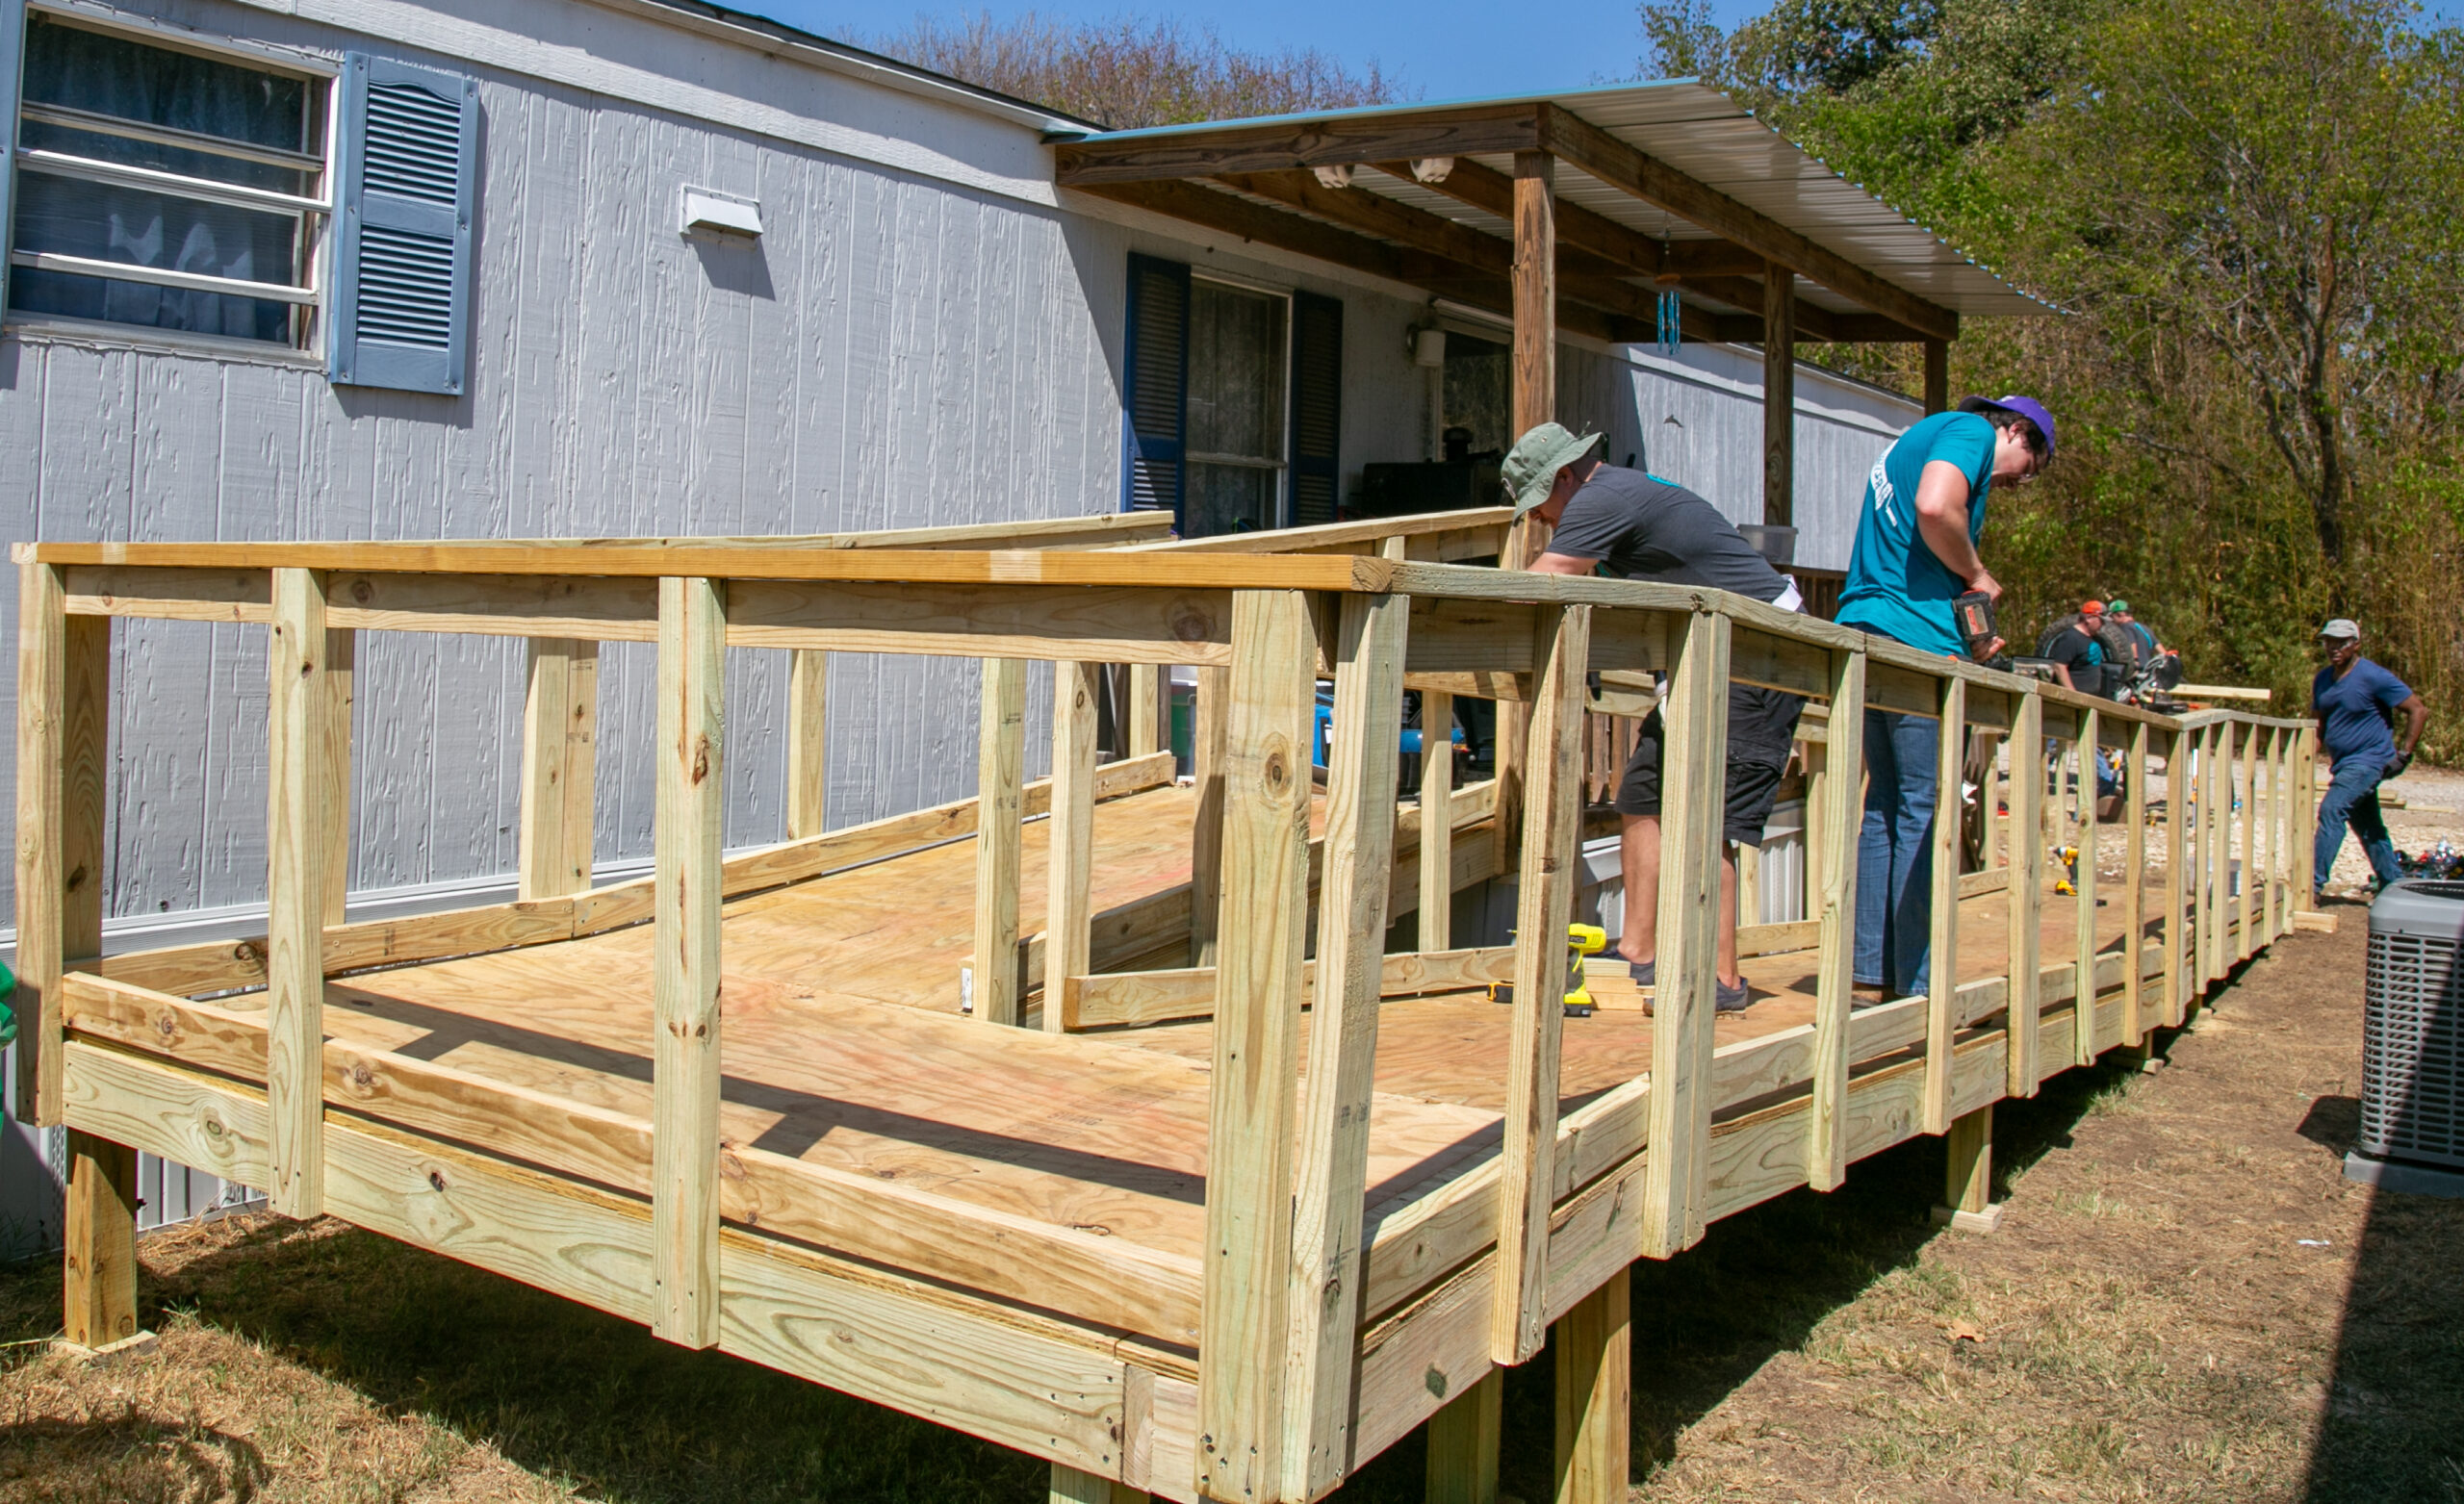 CoServ Employees spent a recent Saturday building a ramp in Lake Dallas. (Photos by Nicholas Sakelaris/CoServ unless otherwise noted)